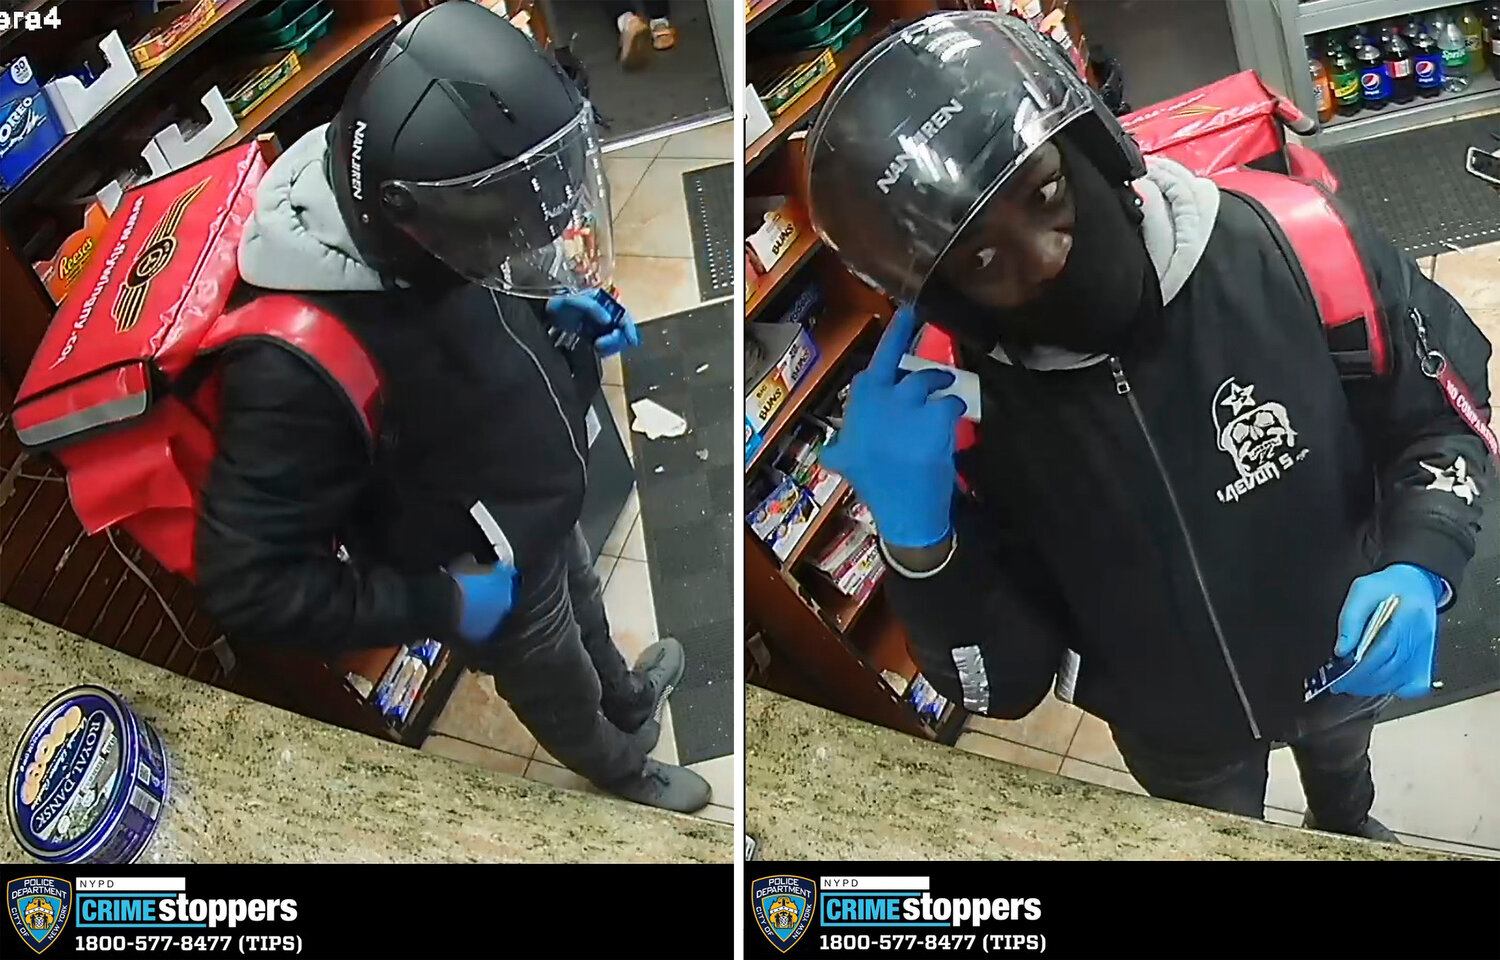 The suspected robber is described as male approximately 25-years-old, 5-foot-8, weighing 140 pounds, with a dark complexion, and a thin build.